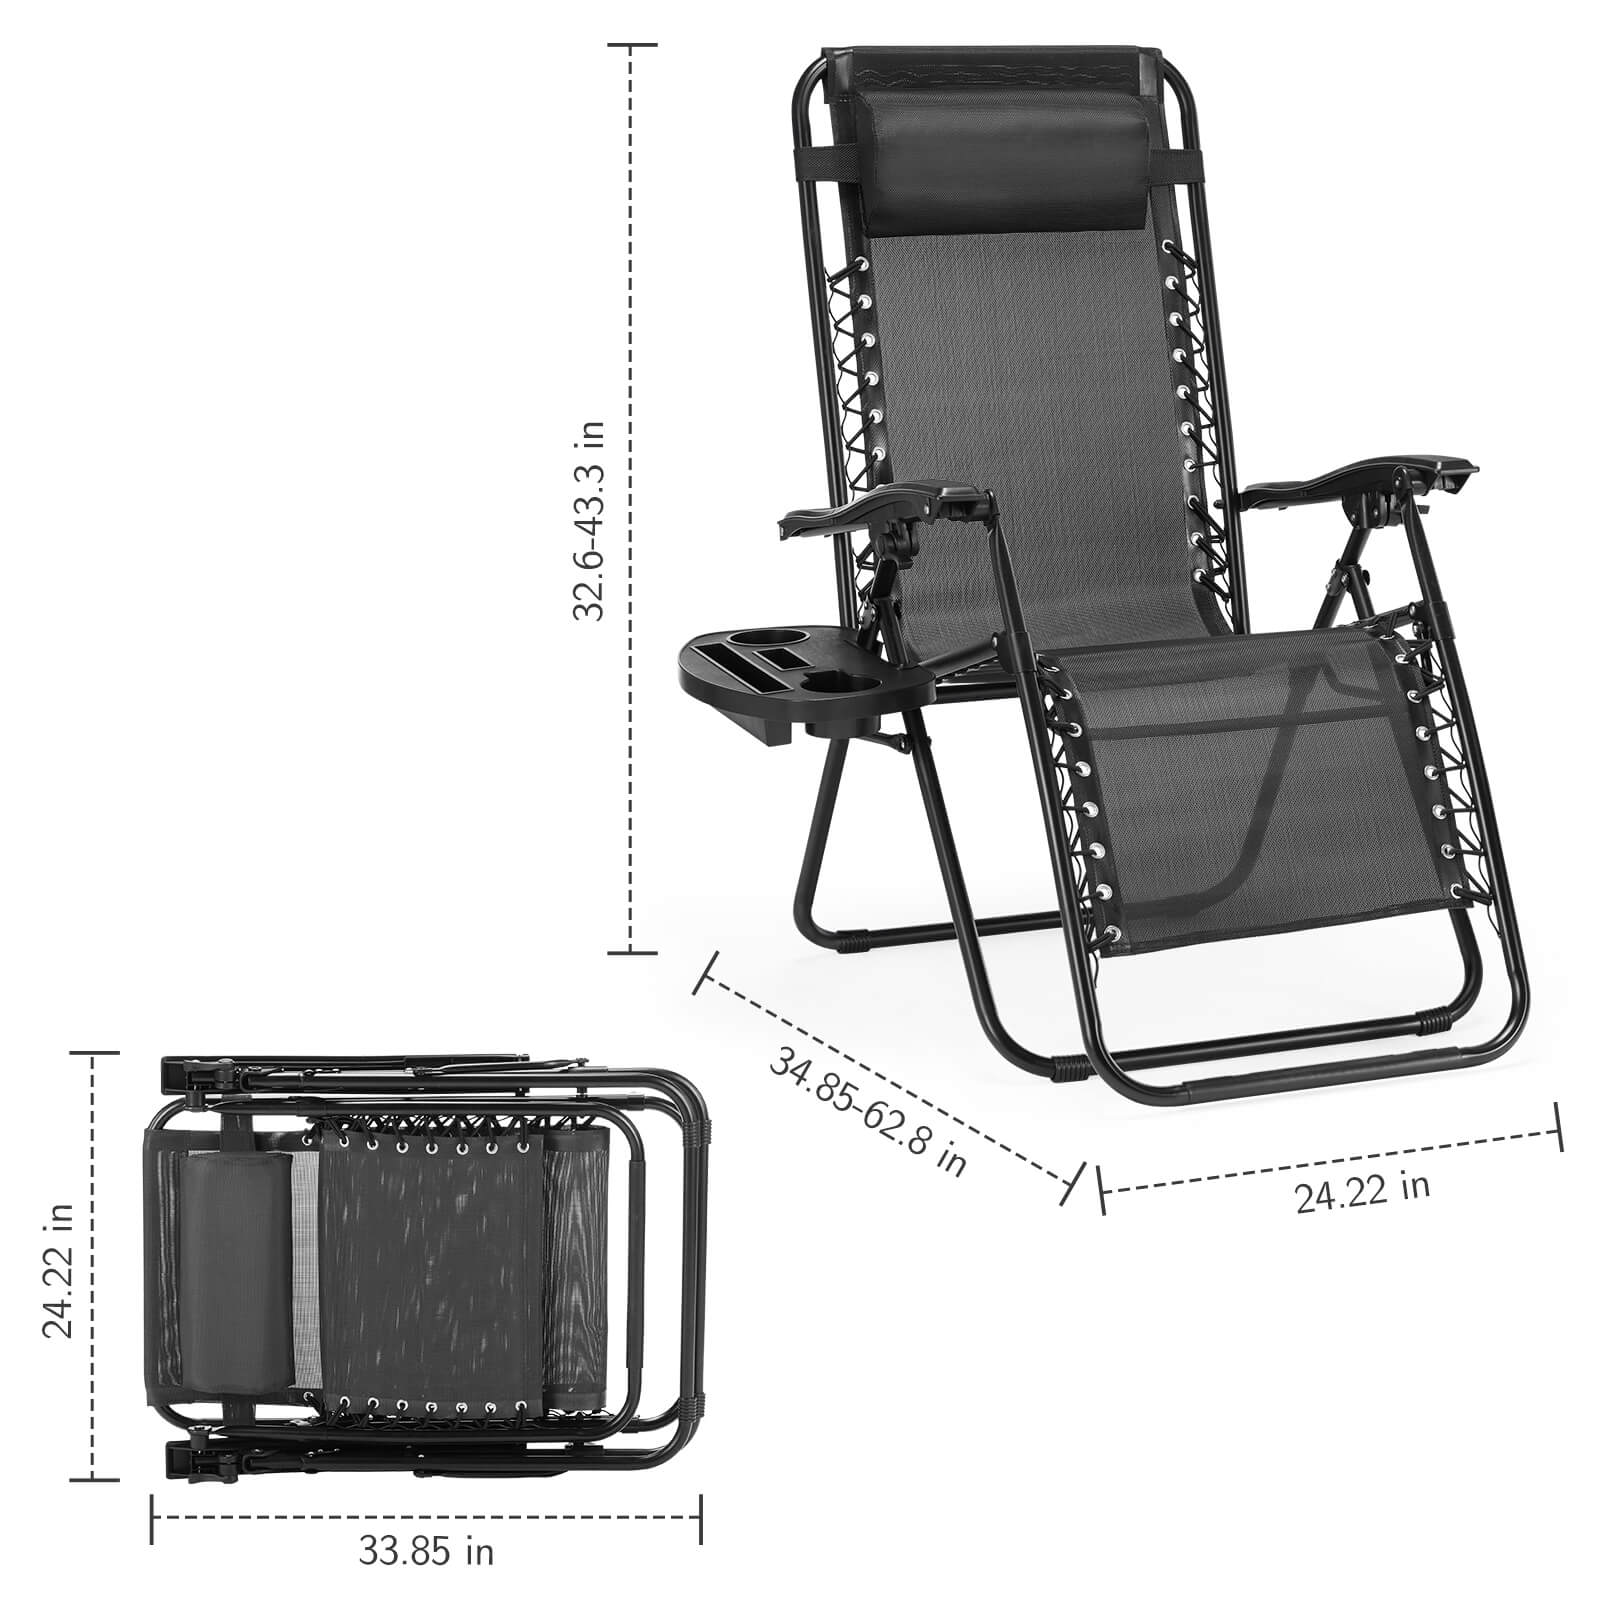 Zero Gravity Chairs - Set of 2 portable recliners with adjustable steel mesh for beach, camping, patio and lawn.